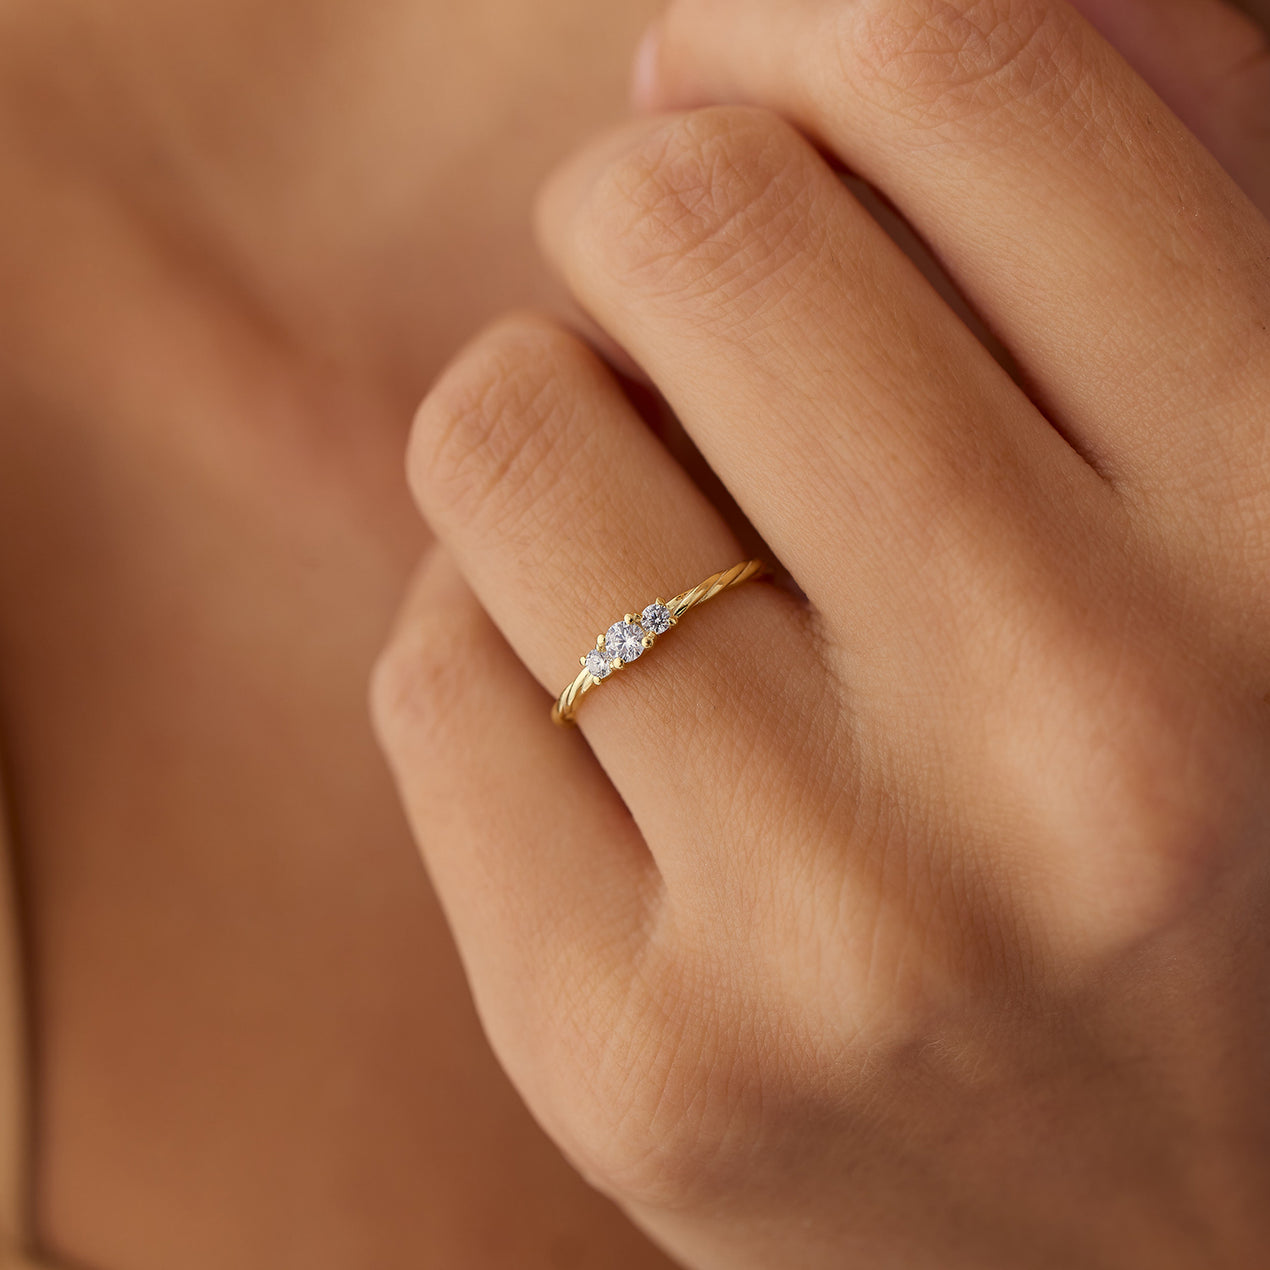 How to Build a Dainty Engagement Ring That Lasts | Frank Darling